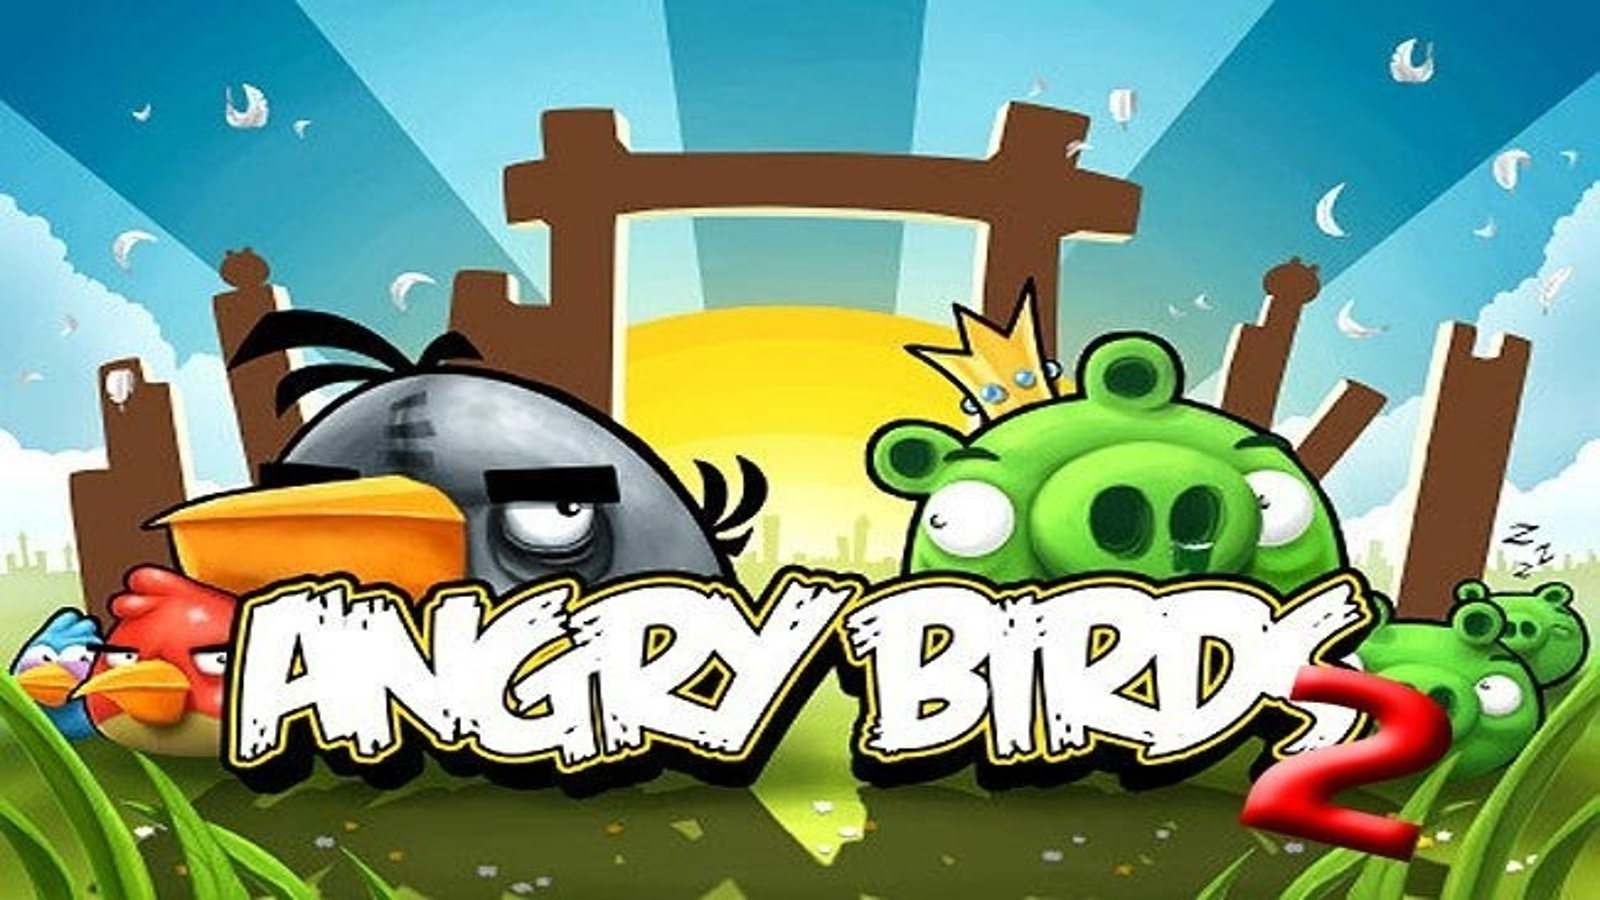 Angry Birds 2 downloaded 20m times in a week